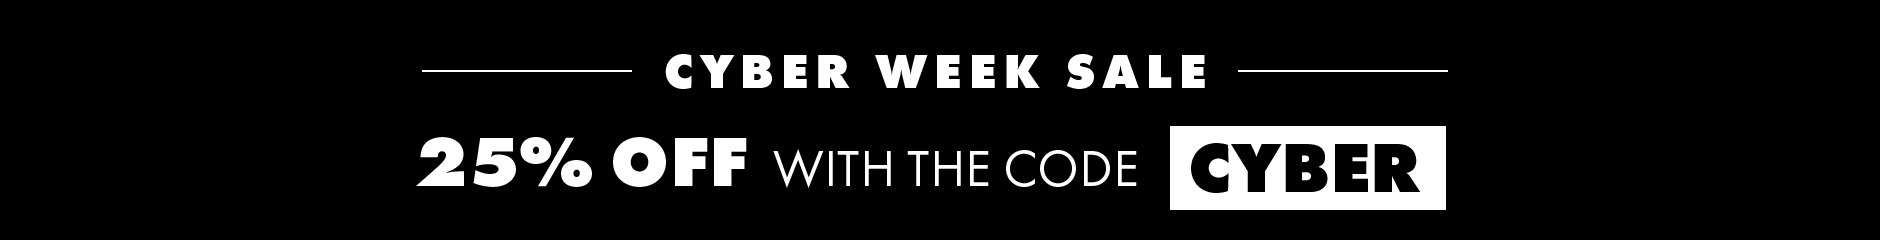 CYBER WEEK - 25% off with code CYBER